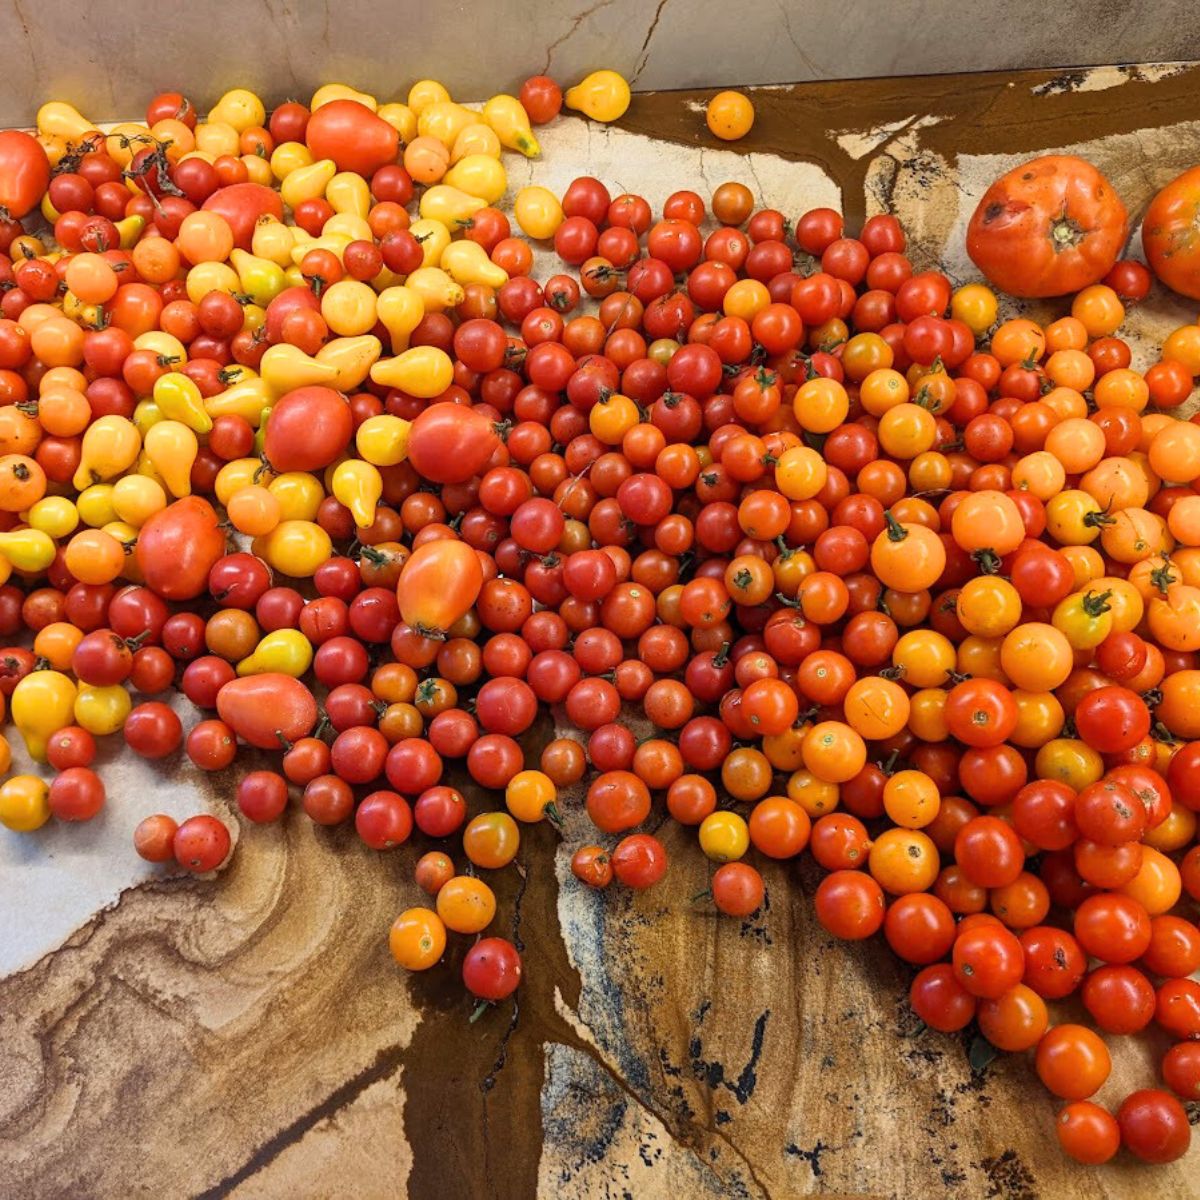 Lots of colorful tomatoes: pear-shaped, cherry, red, yellow, and orange. 